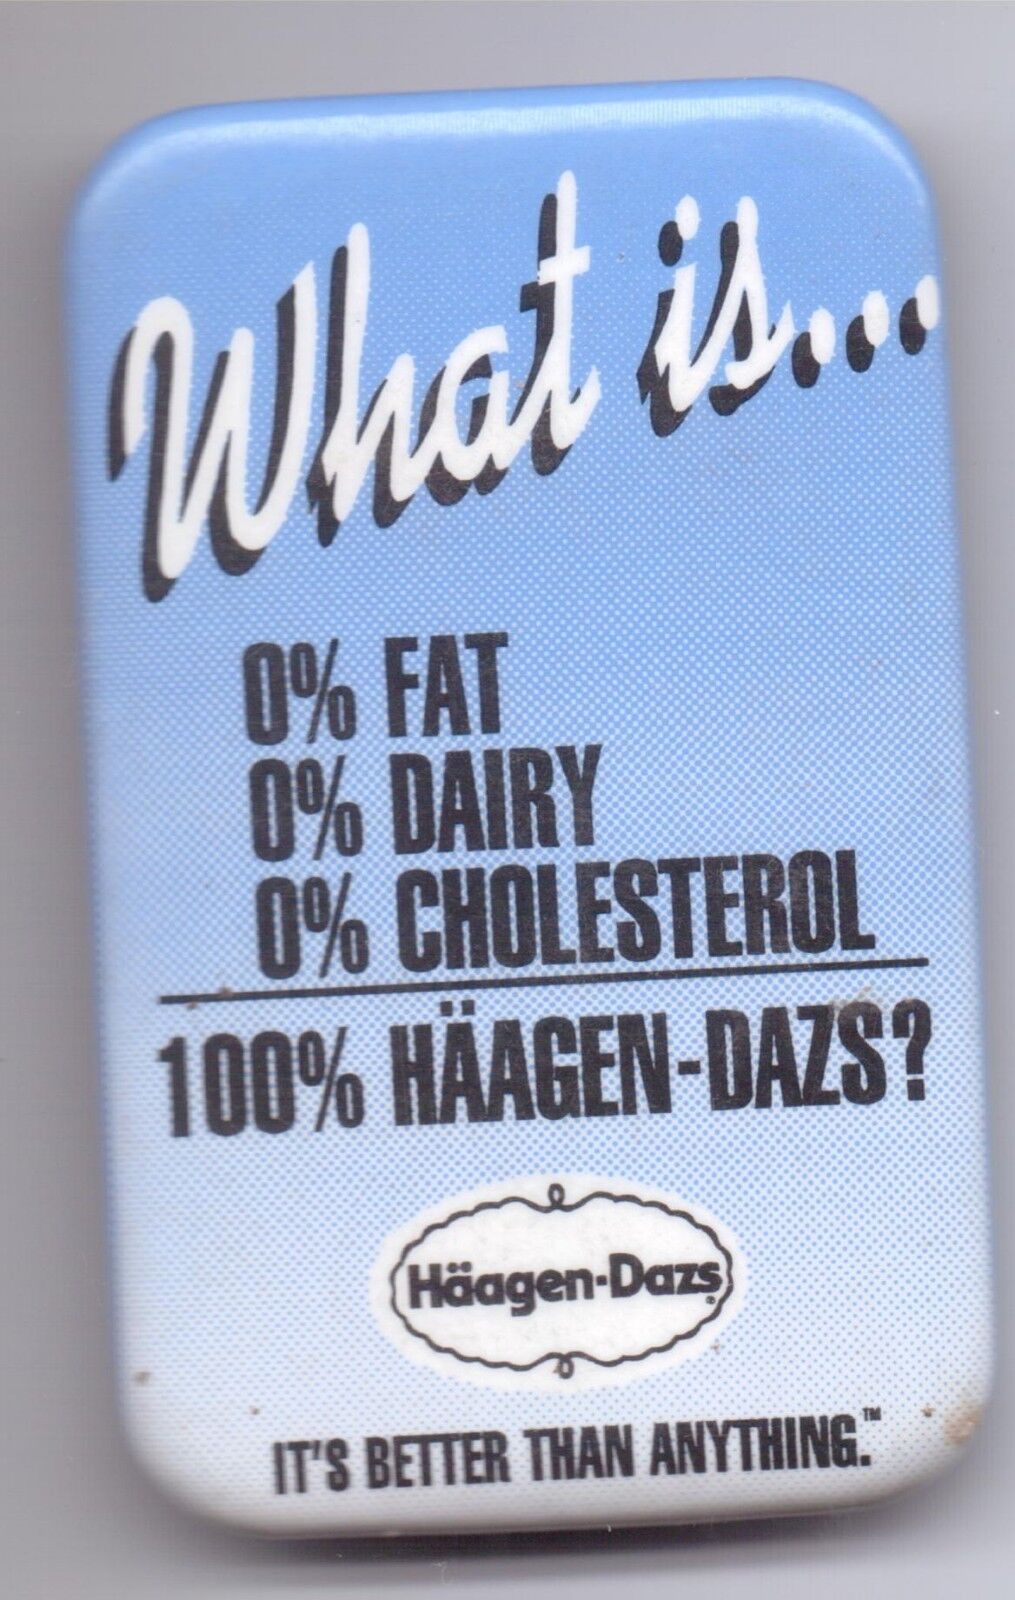 HAAGEN DAZS-WHAT IS...O% FAT-0% DAIRY-0% CHOLESTEROL-ONE 3/4 INCHES WIDTH